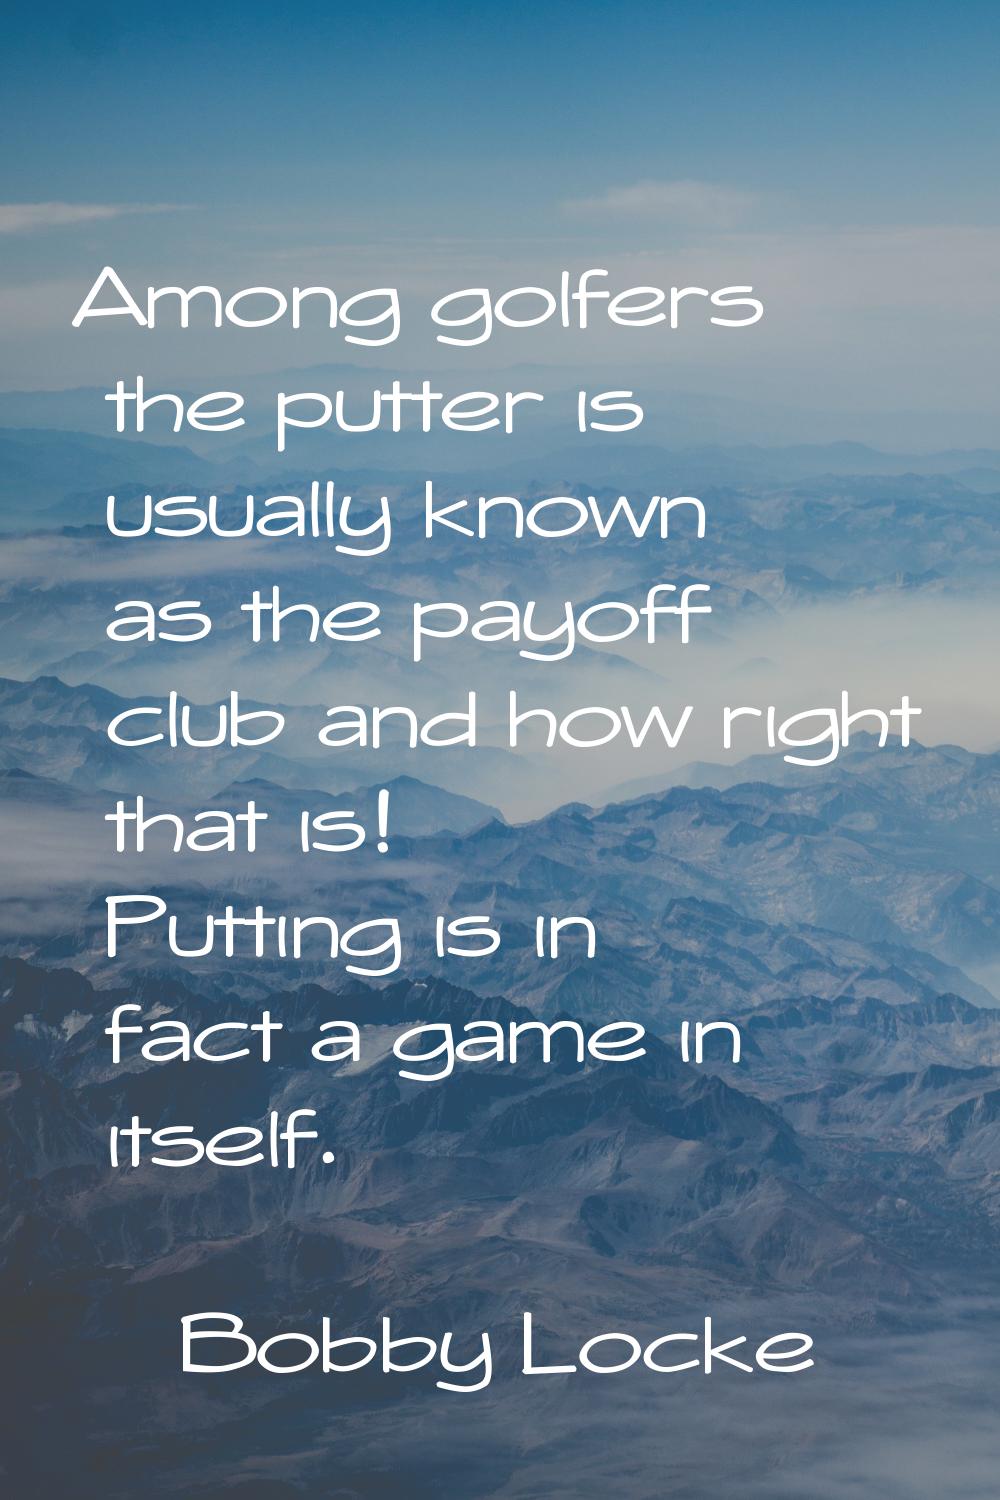 Among golfers the putter is usually known as the payoff club and how right that is! Putting is in f